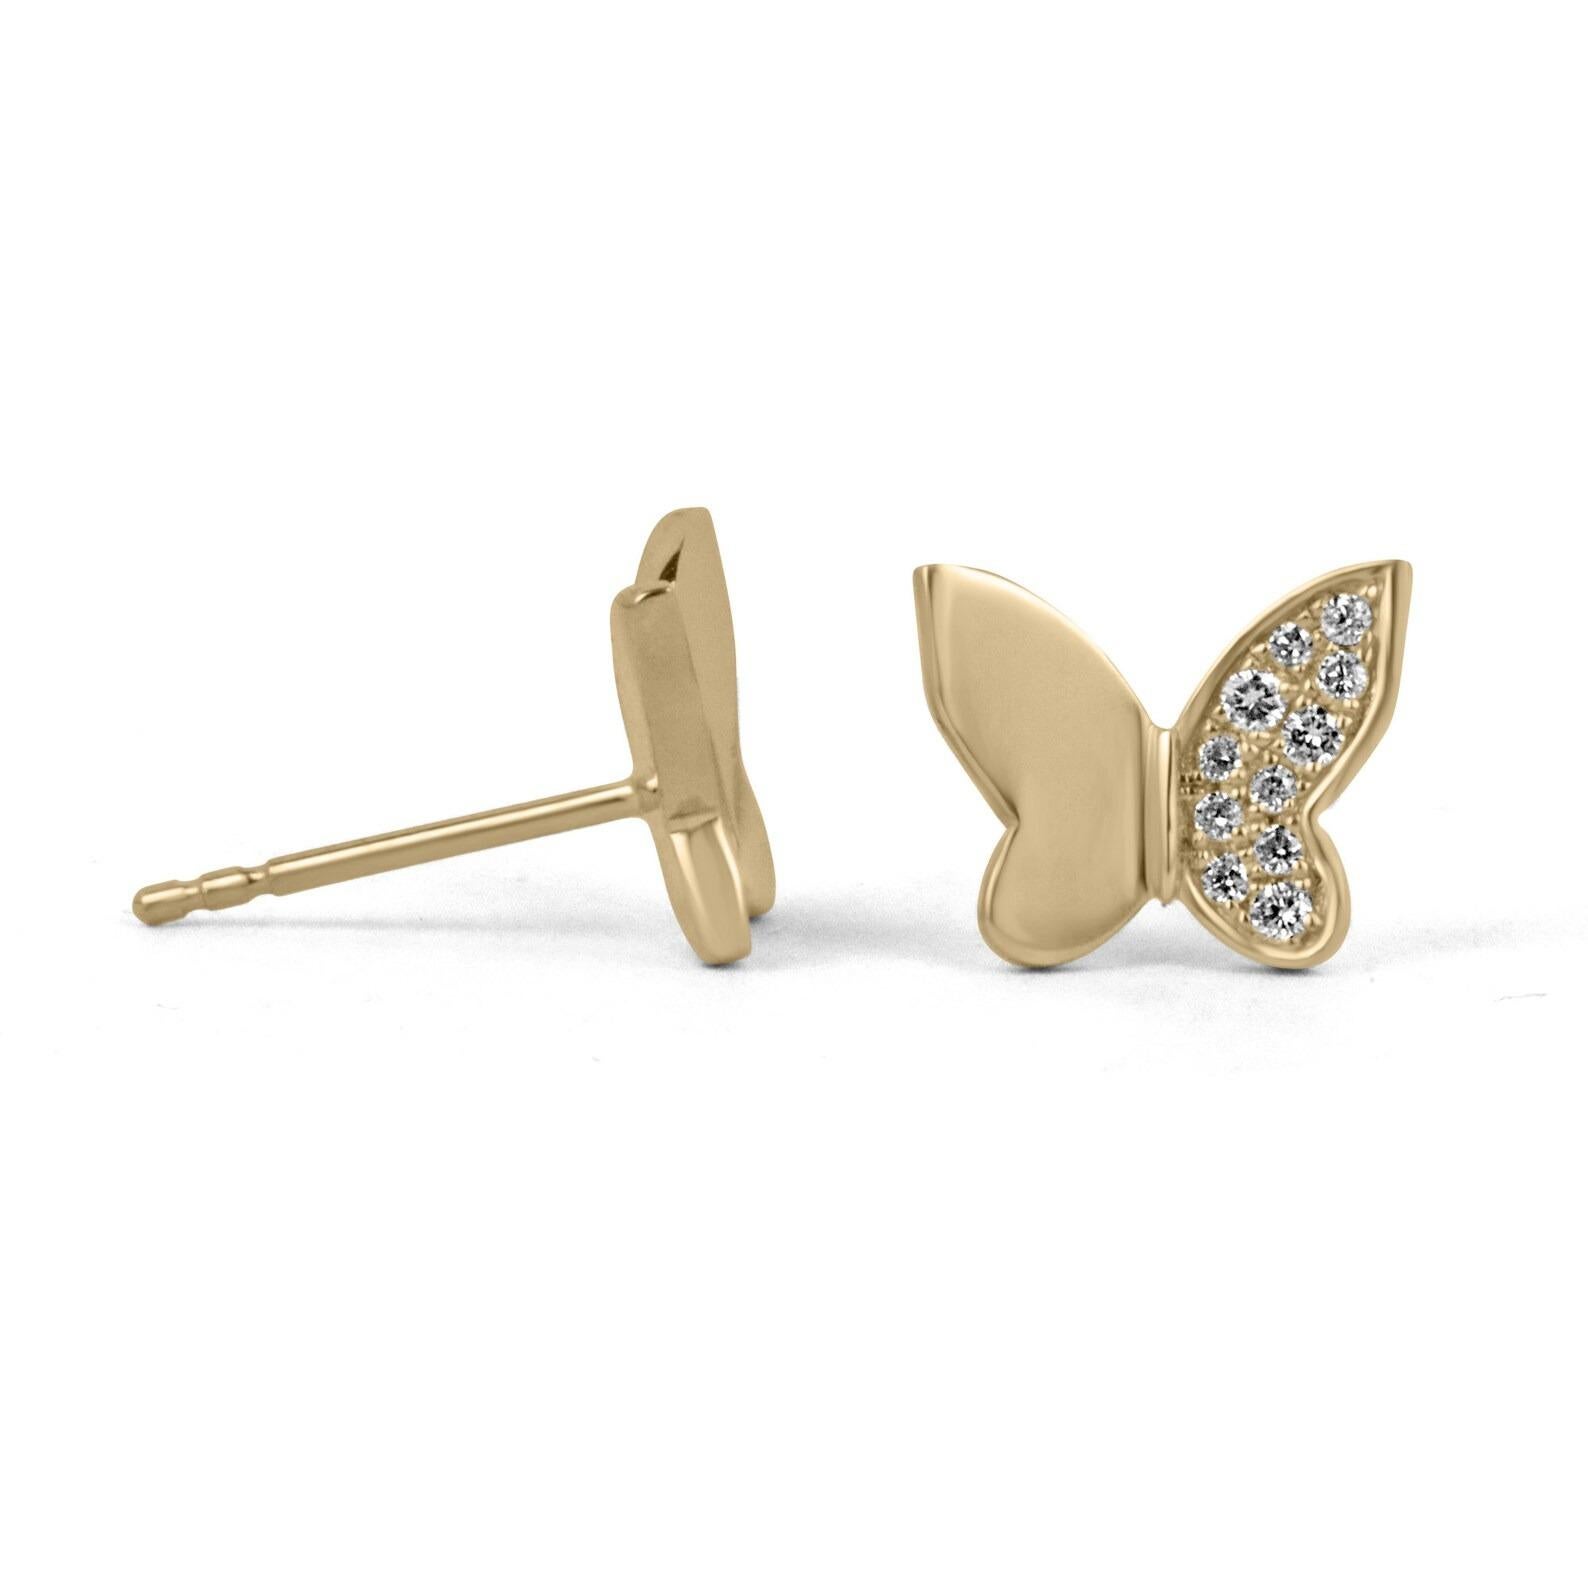 A stunning, simple, and dainty pair of diamond butterfly stud earrings. This gorgeous pair showcases 0.20-carats of natural radiating brilliant round cut diamonds, pave set within. Crafted in 14K gold, in any color of choice. The perfect gift for